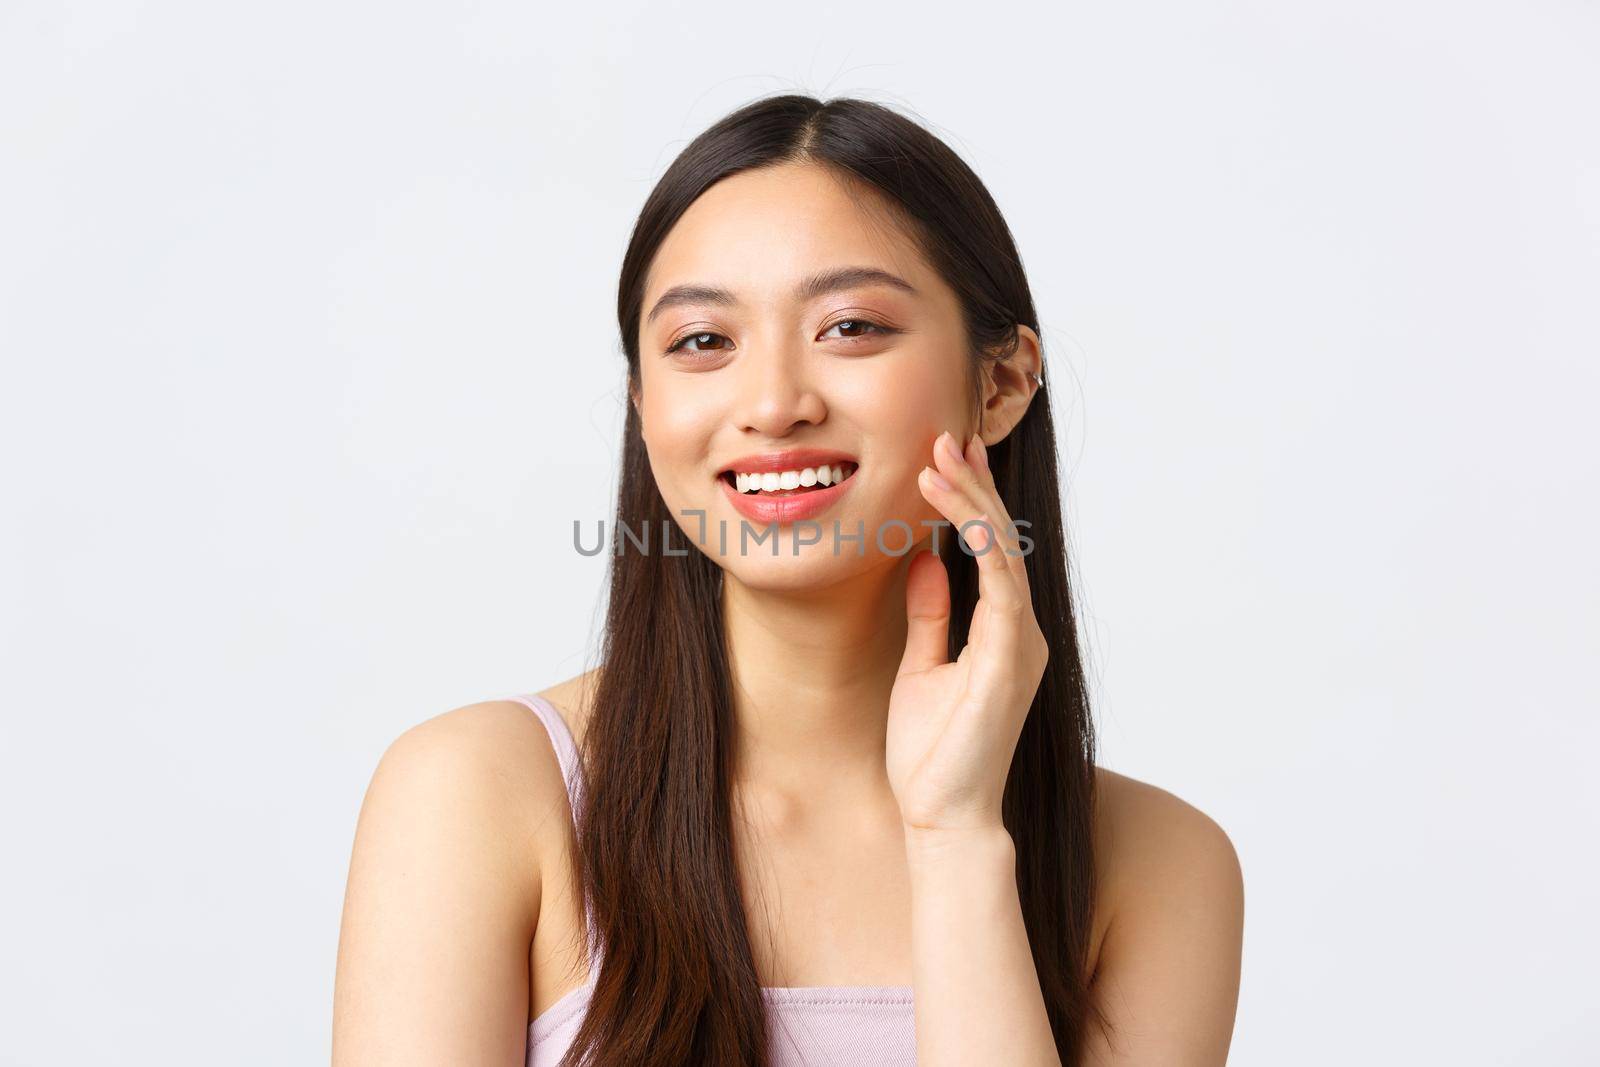 Beauty, fashion and people emotions concept. Beautiful asian girl trying new skincare routine product or makeup, smiling happy and satisfied as touching skin gently, white background.